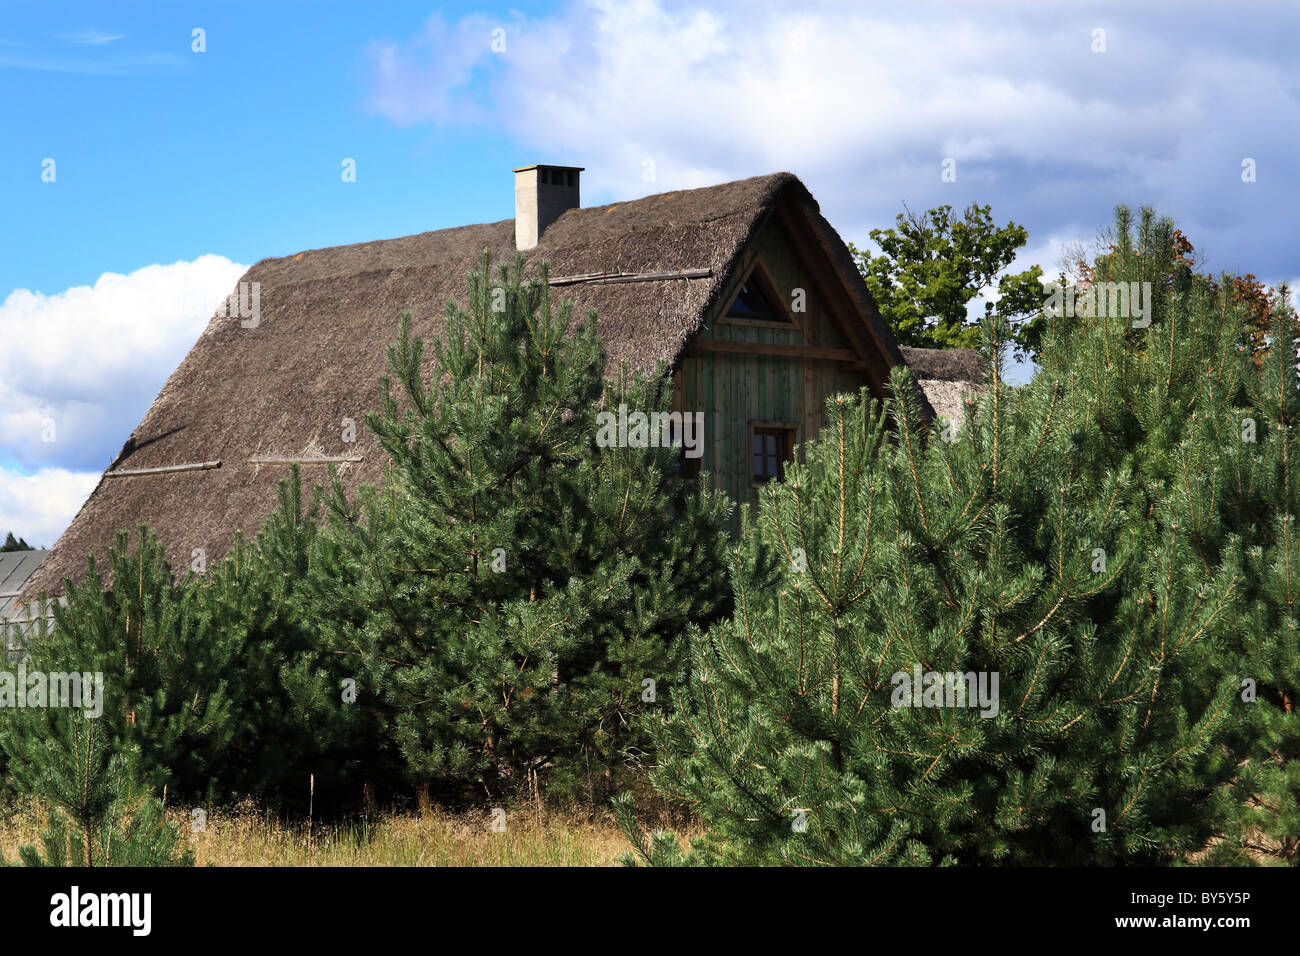 Thatched roof of a house in Tuchola Forest (Bory Tucholskie), Poland. Stock Photo